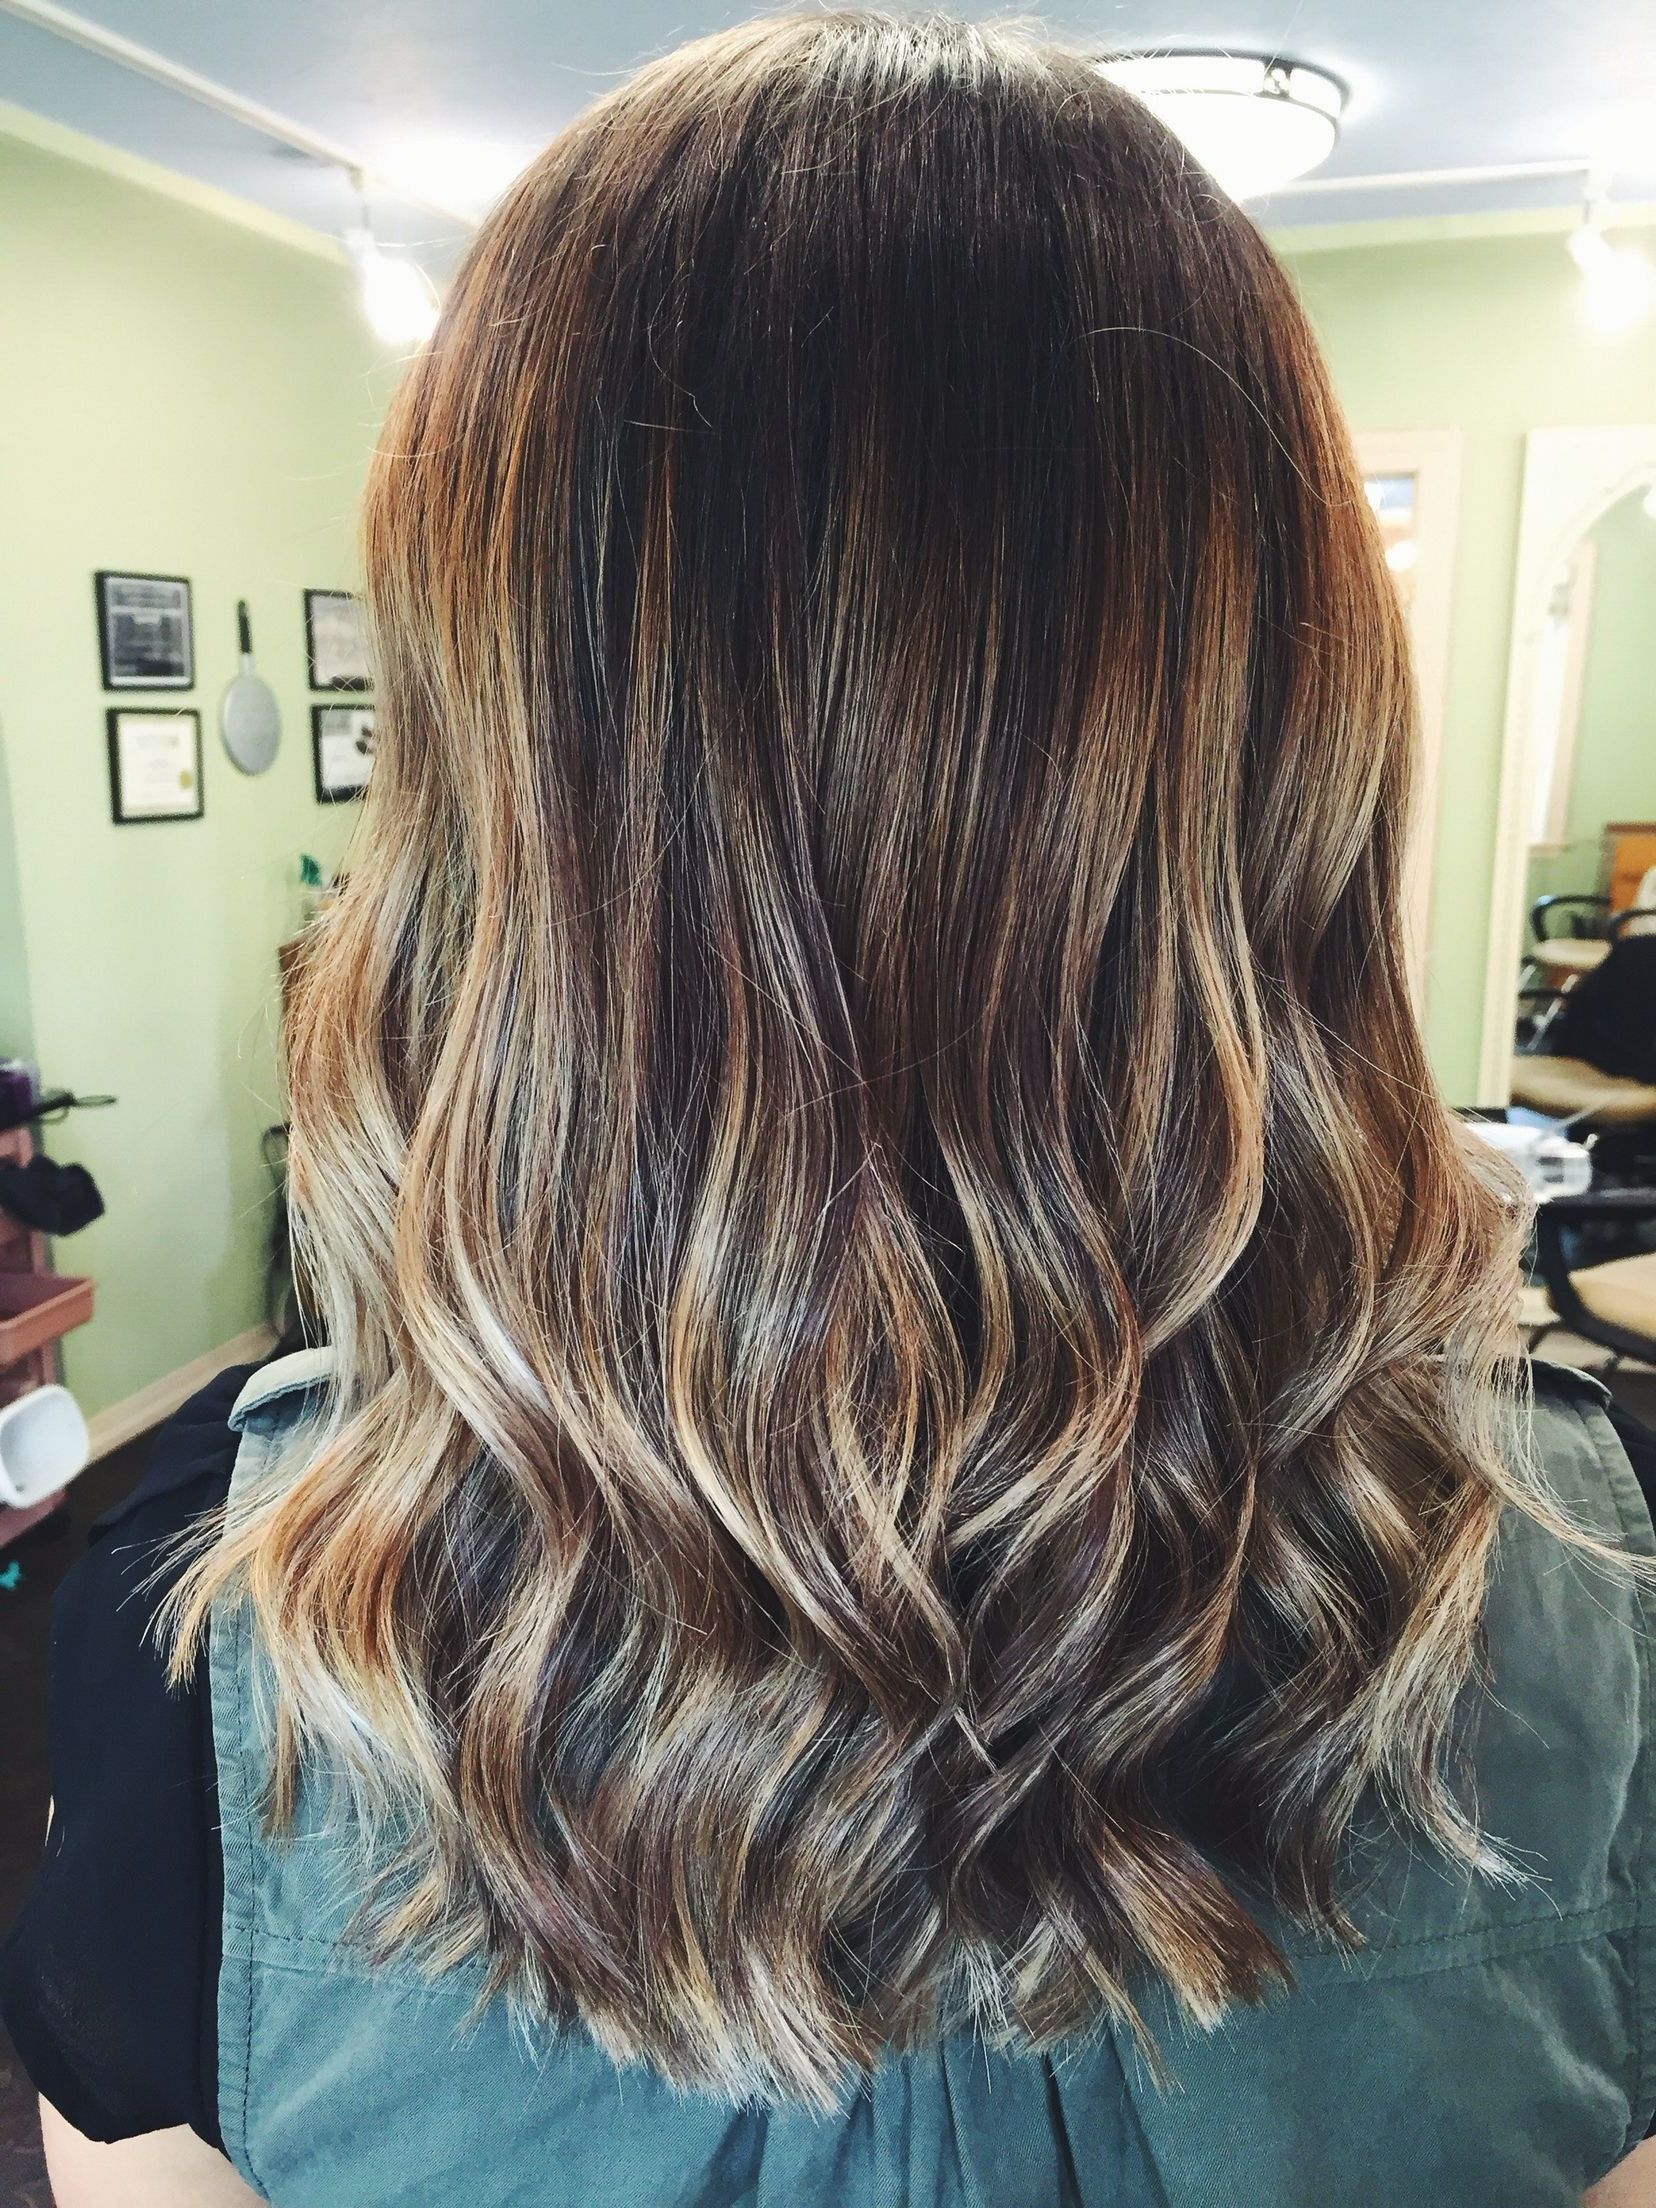 Trendy Dirty Blonde Hairstyles With Subtle Highlights Regarding Subtle Blonde Balayage Highlights For Brunettes. (Gallery 13 of 20)